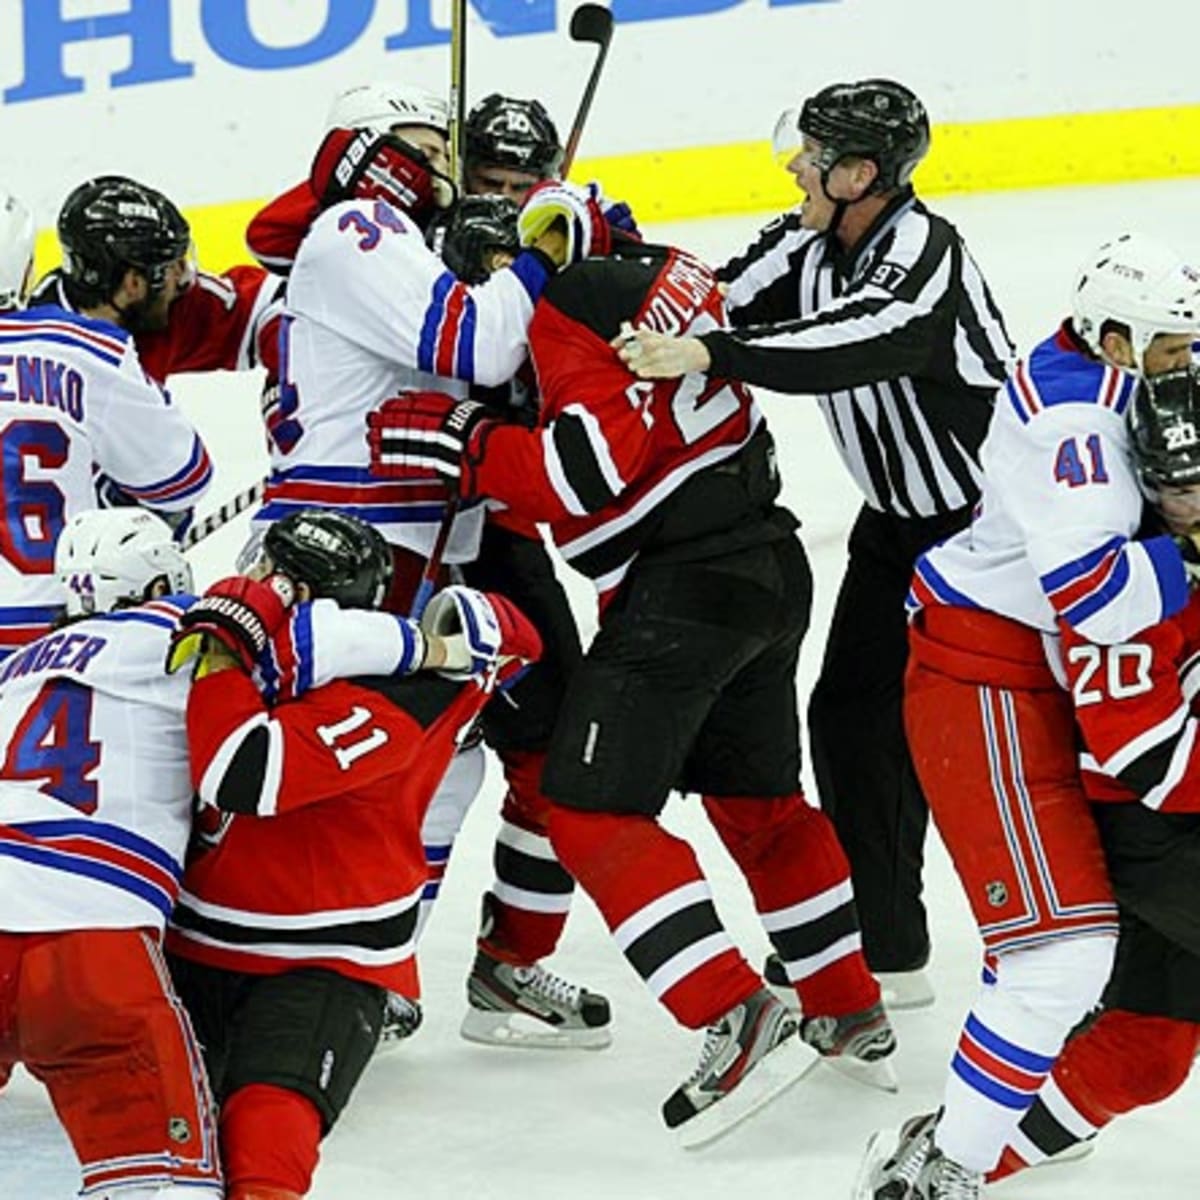 Brodeur Shuts Out Panthers and Devils Tie Series - The New York Times